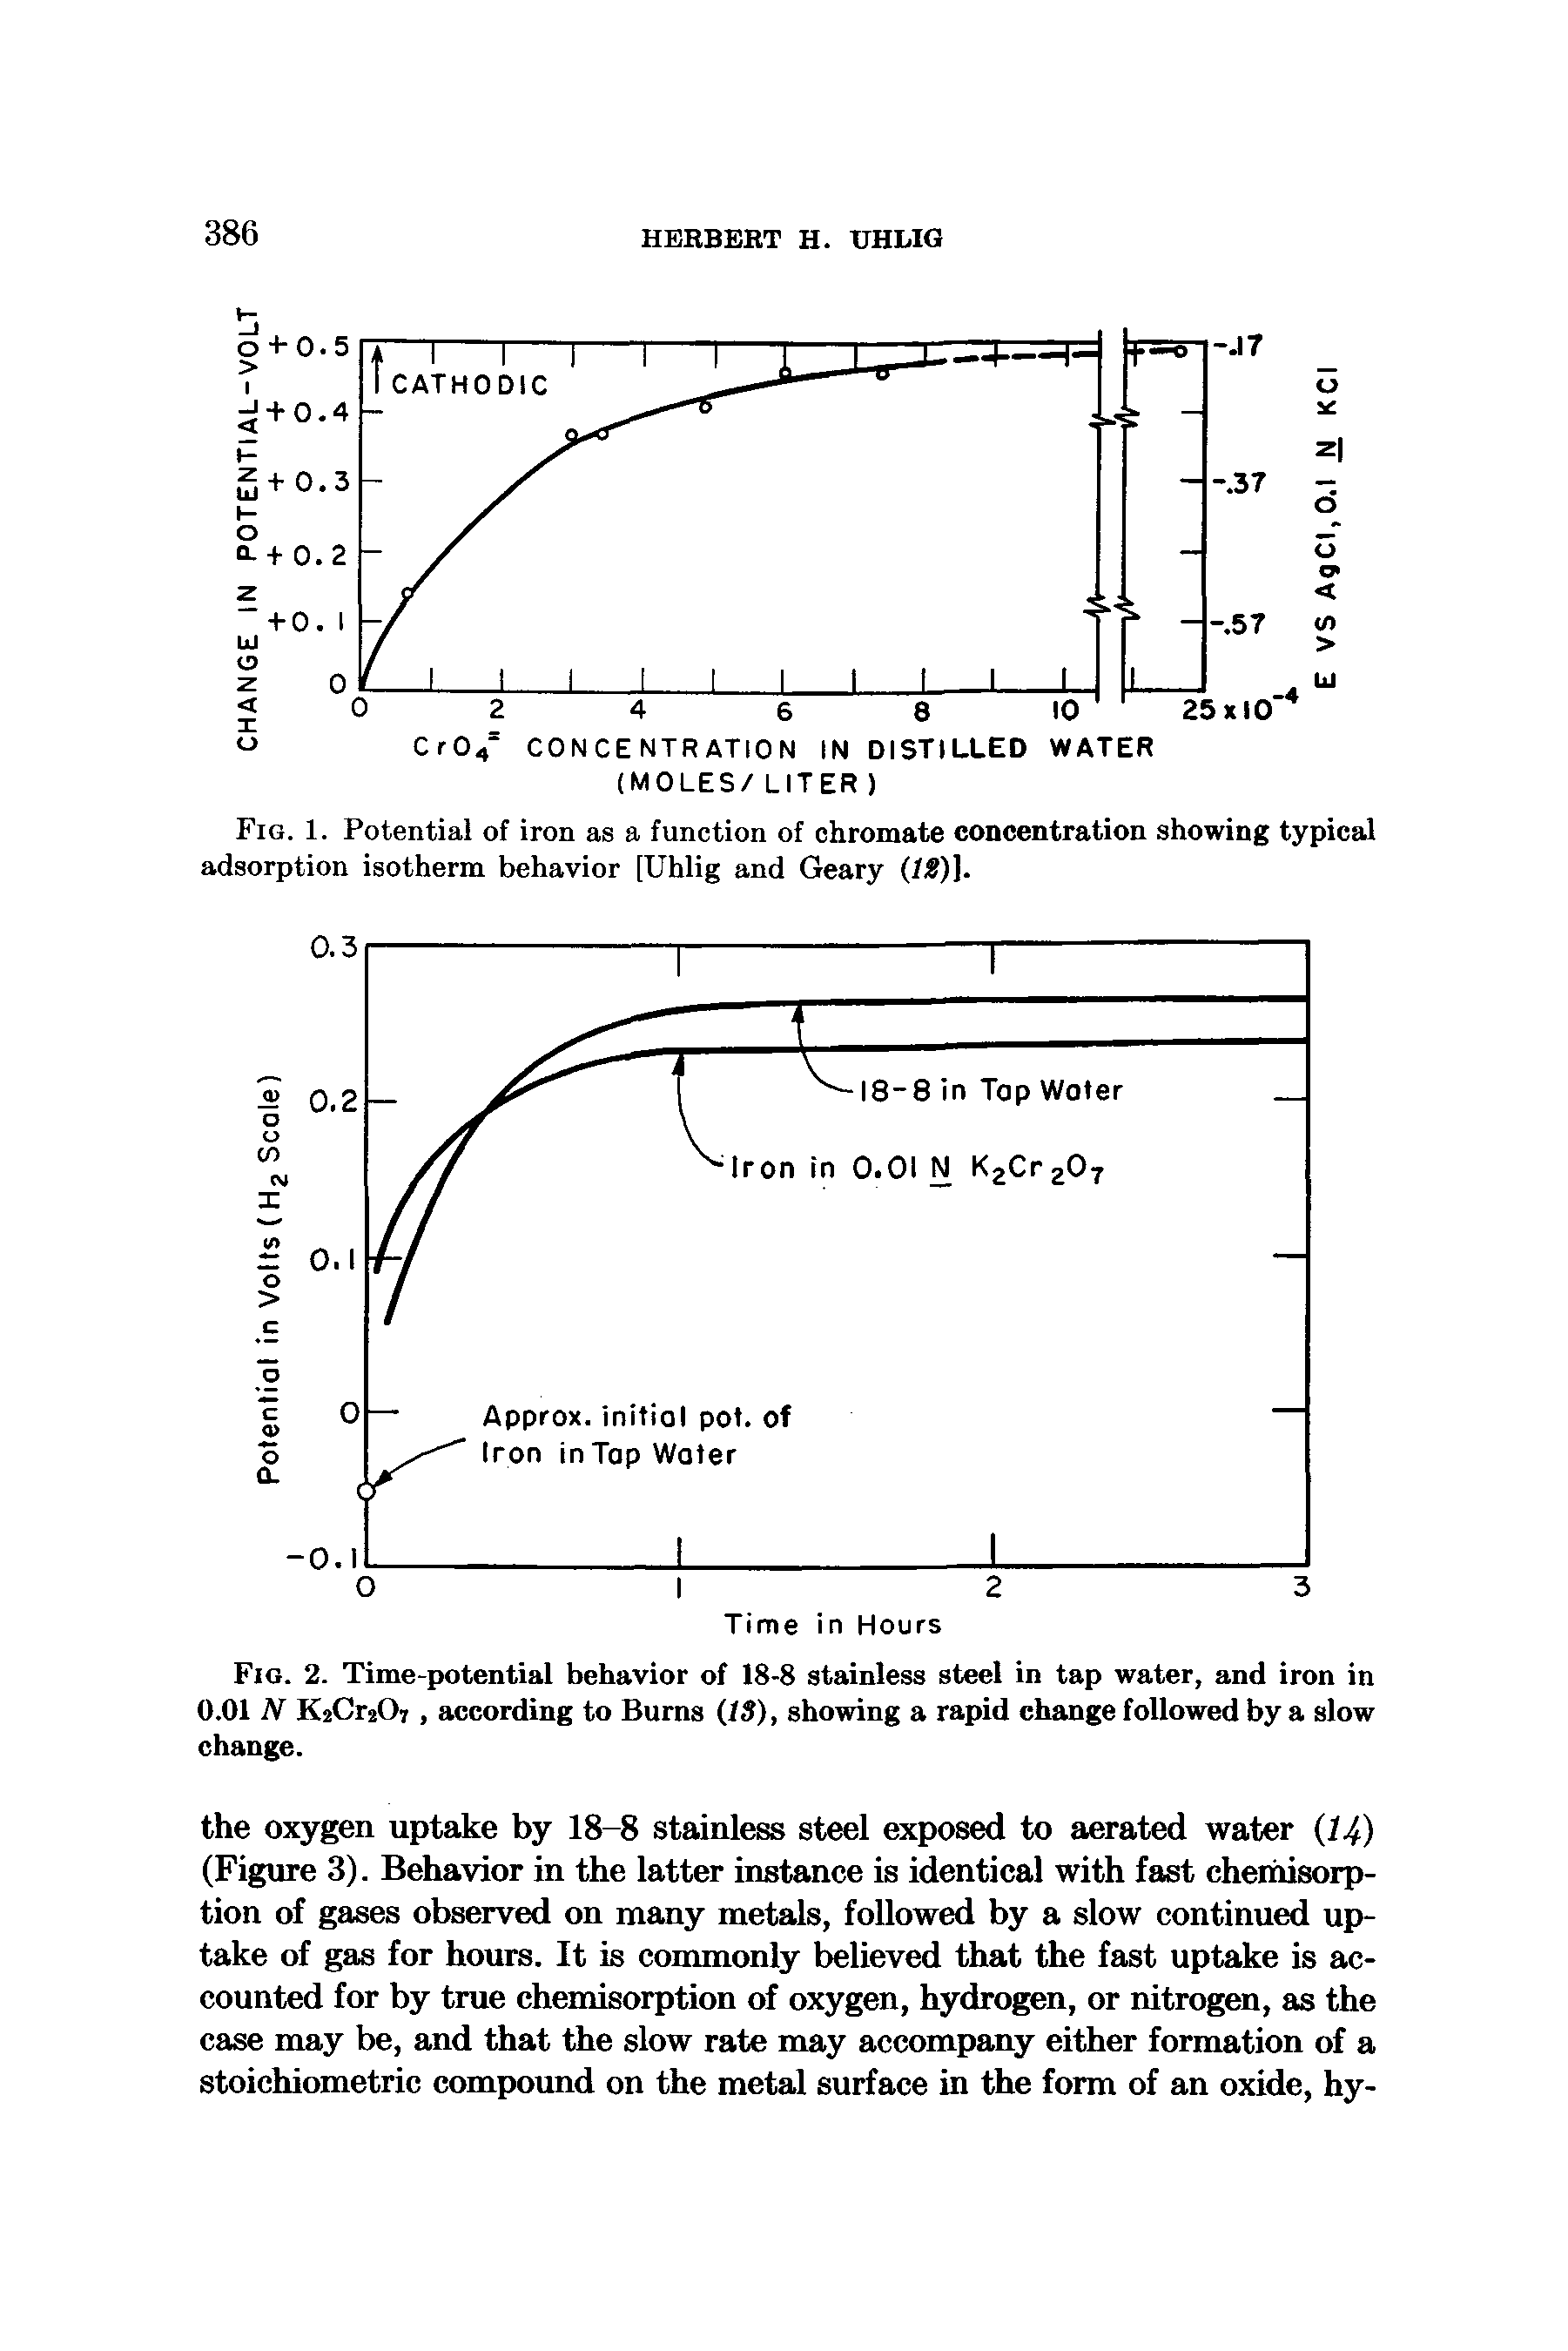 Fig. 2. Time-potential behavior of 18-8 stainless steel in tap water, and iron in 0.01 N K2Cr207, according to Burns (IS), showing a rapid change followed by a slow change.